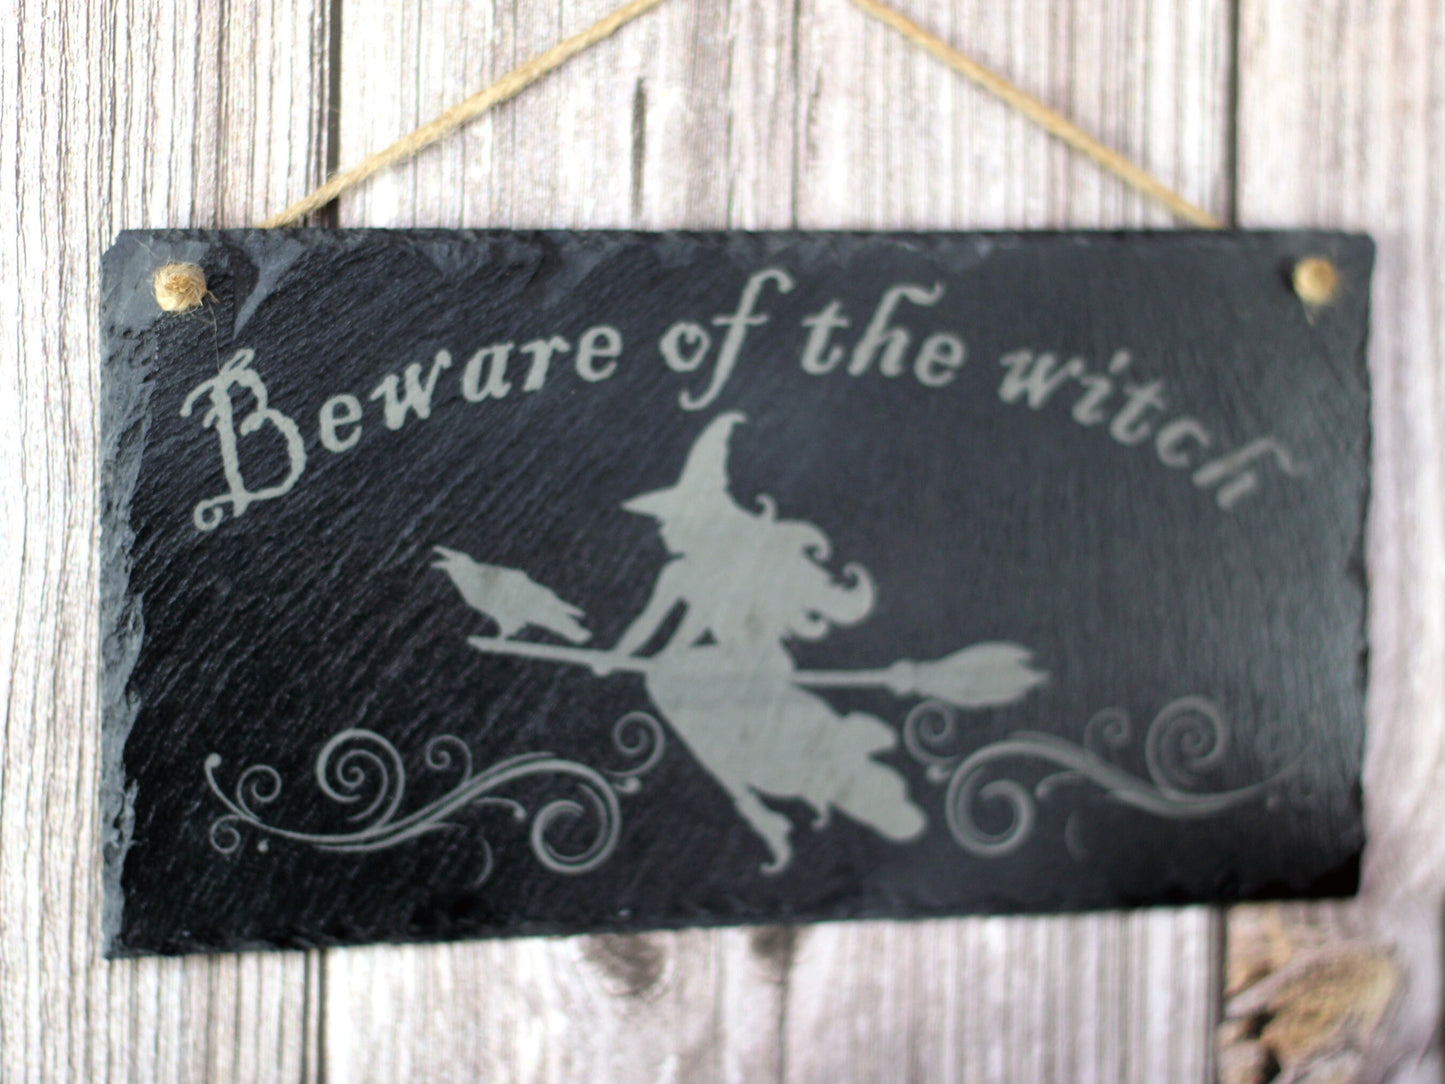 Slate beware of the witch sign with cat, raven or hat design, witchcraft or Wicca gift